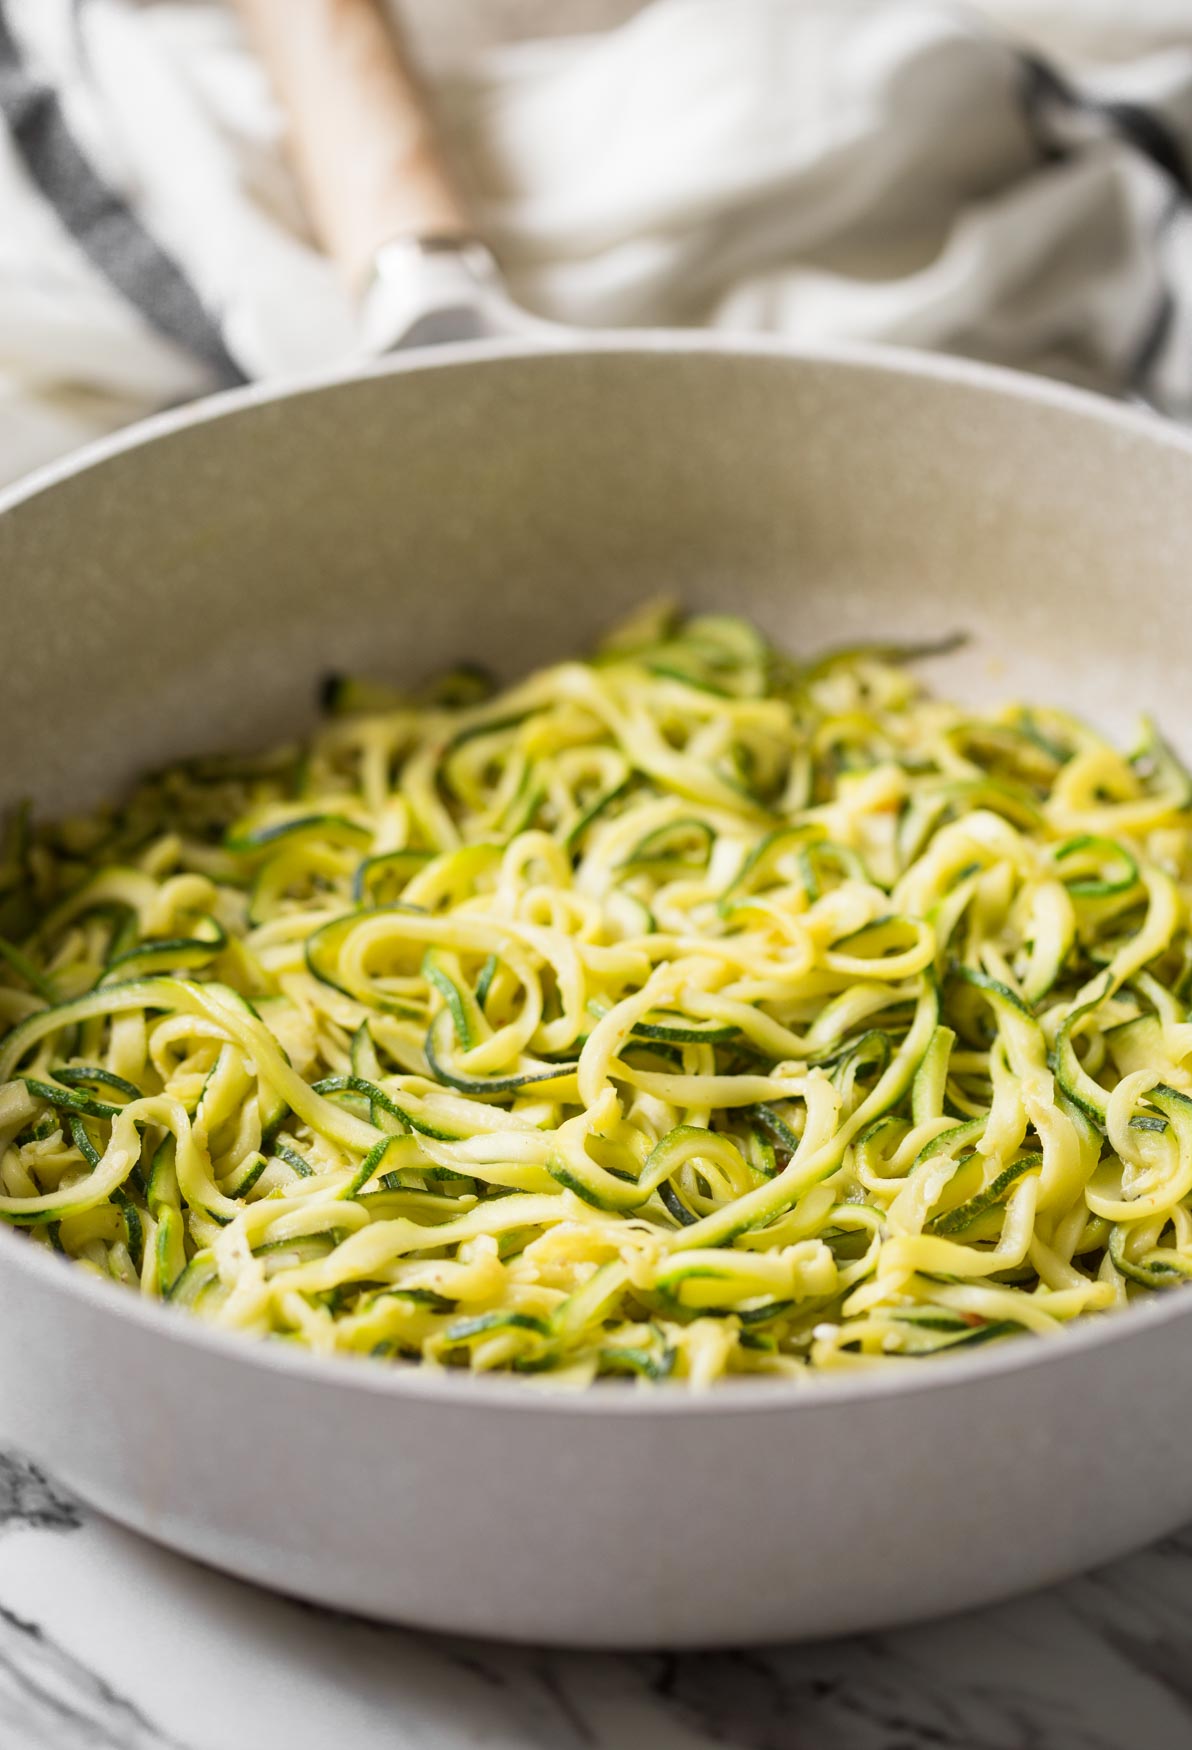 Fresh zucchini noodles stir-fried in a skillet with chili, garlic, and olive oil.